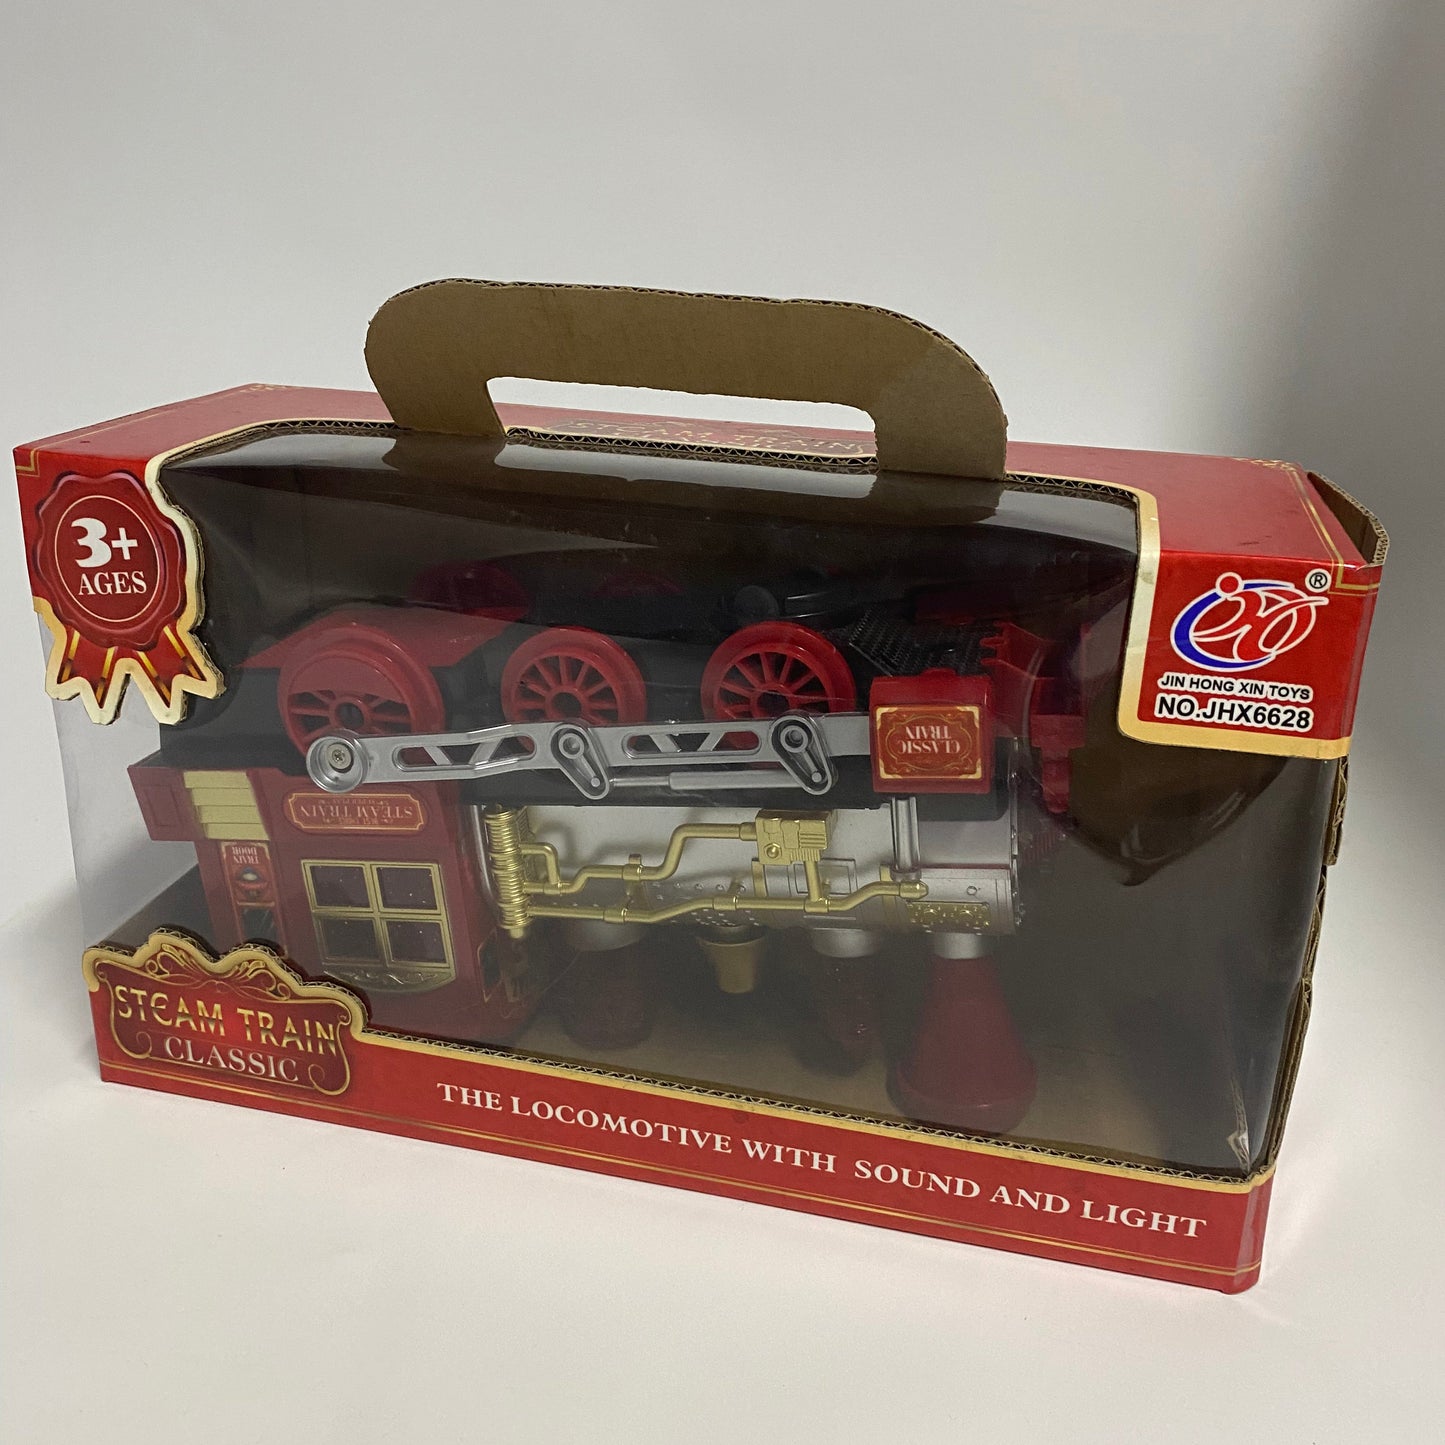 Starfun Learning & Education Toys Steam Train for Children's Birthday Gifts